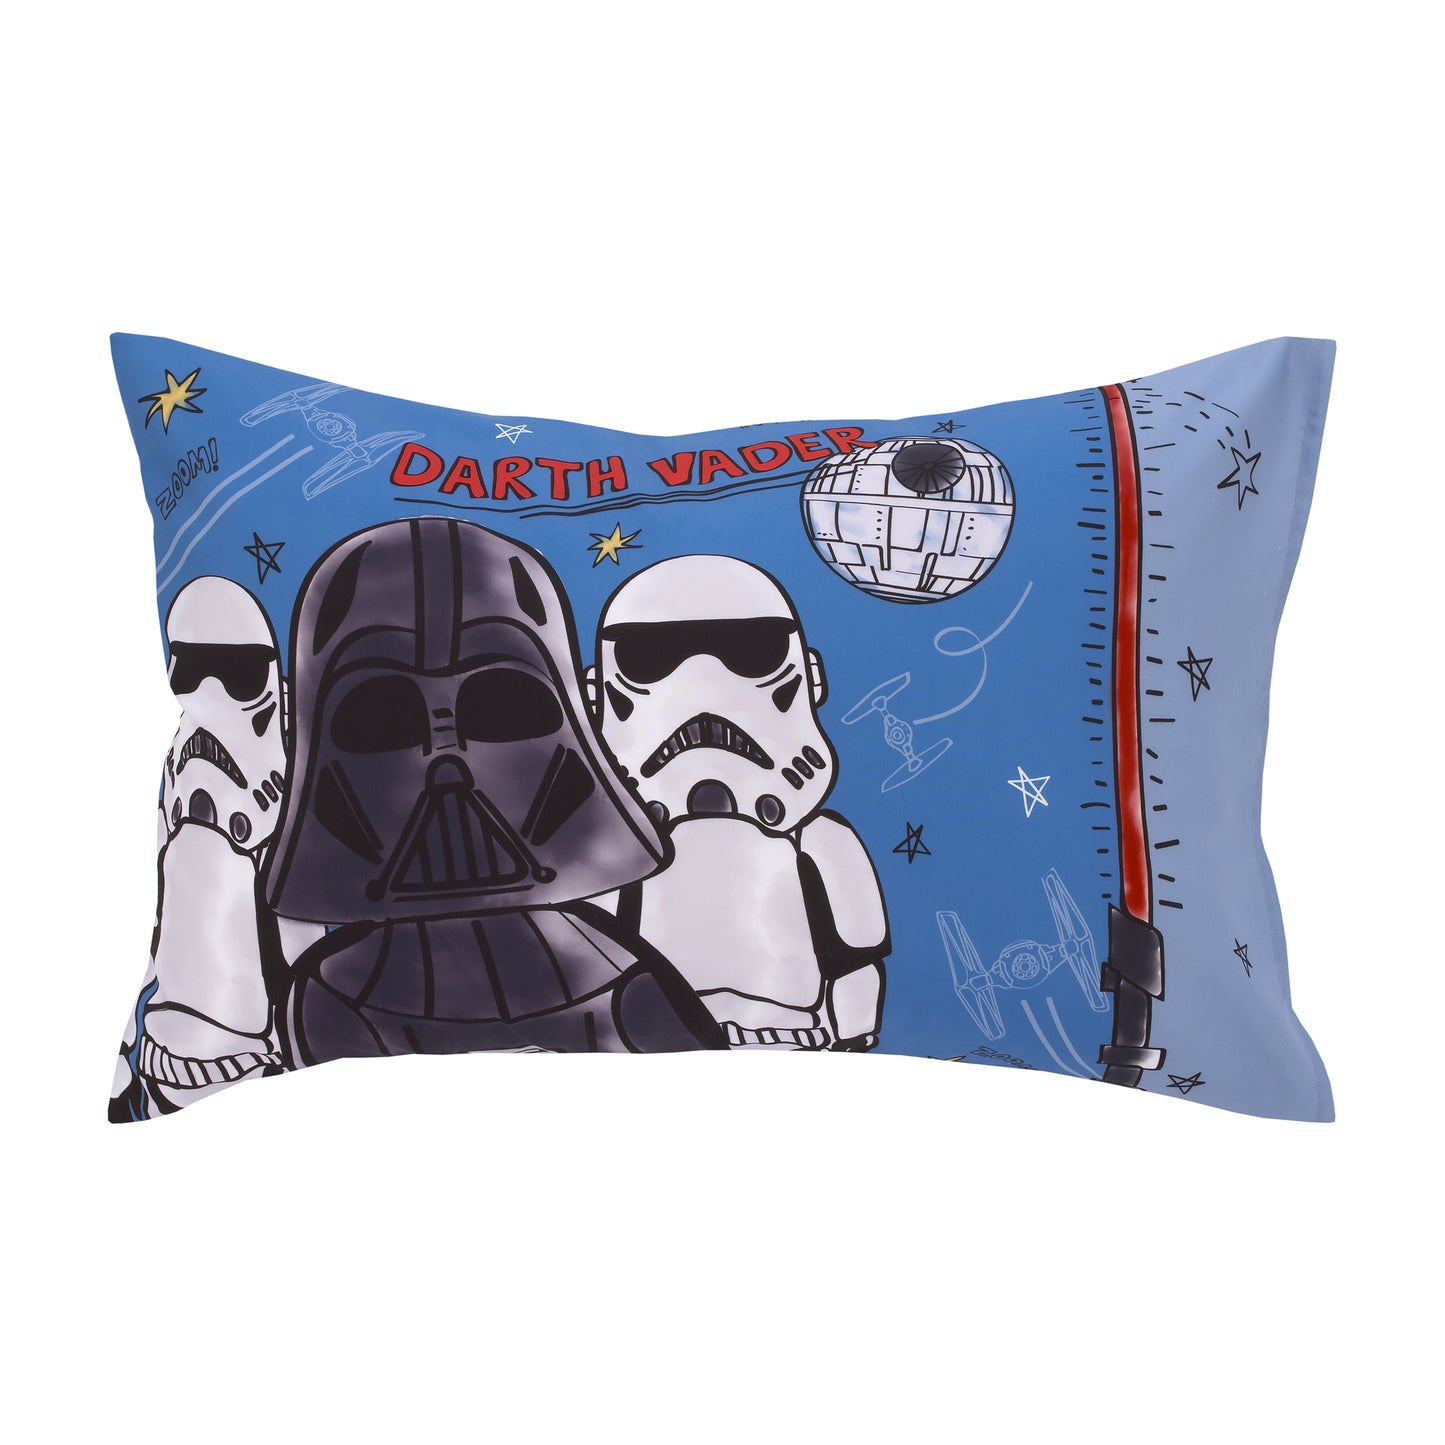 Star Wars Rule the Galaxy Blue, Grey, White 4 Piece Toddler Bed Set - Comforter, Fitted Bottom Sheet, Flat Top Sheet, Reversible Pillowcase